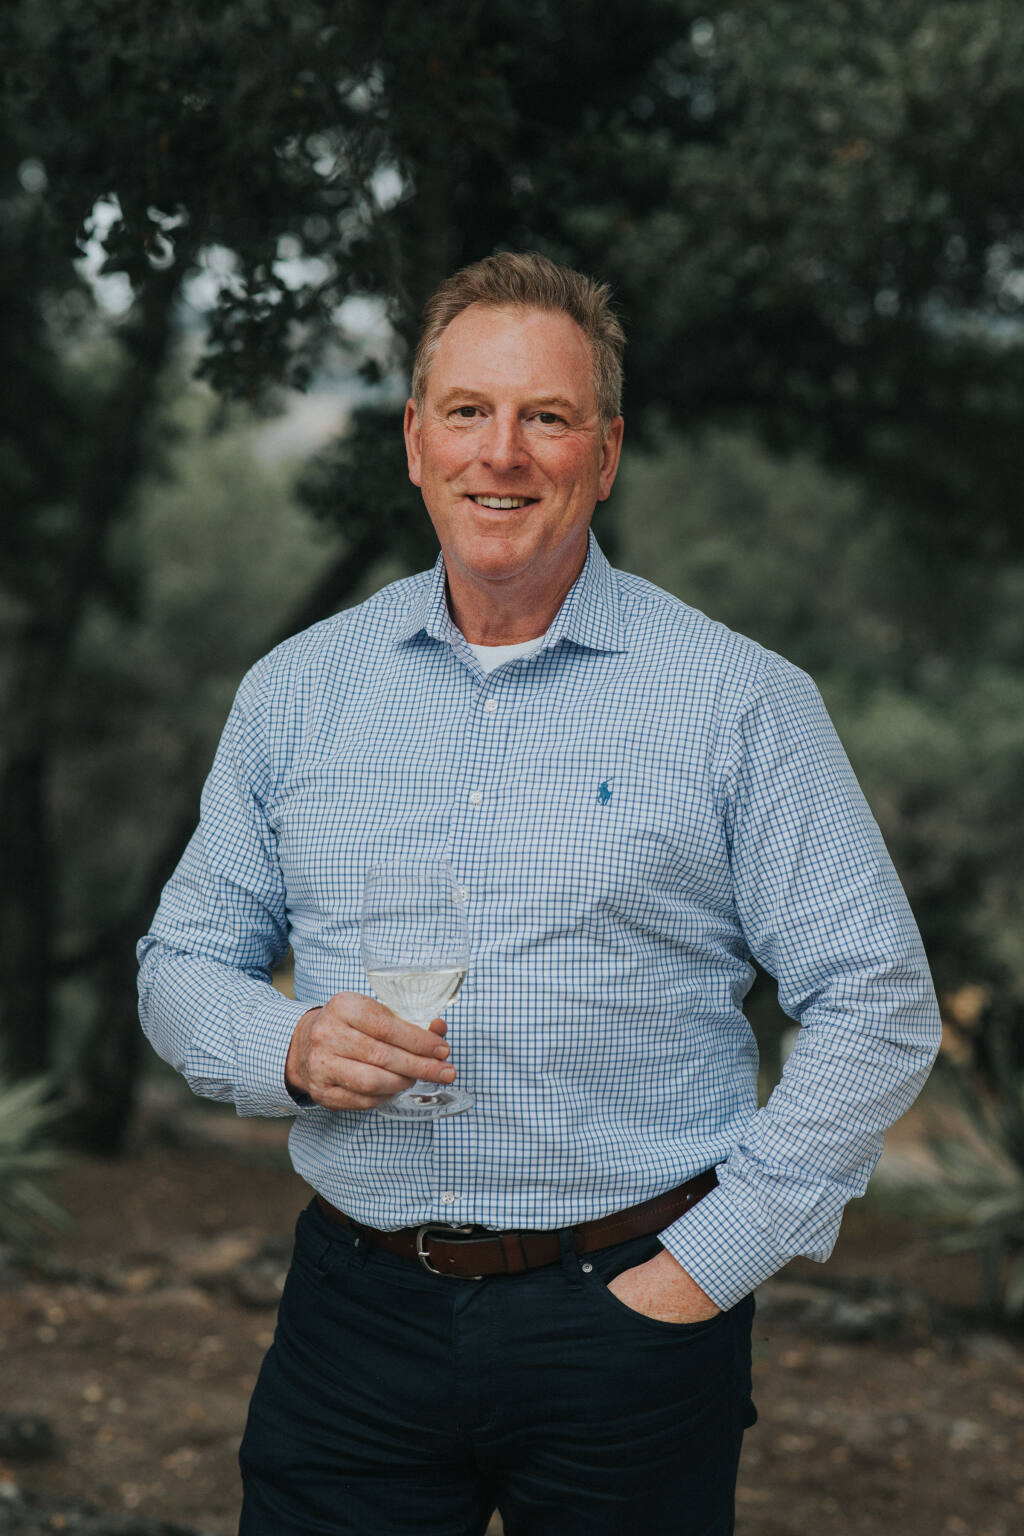 John Grant is named CEO of Cline Family Cellars in July 2020.